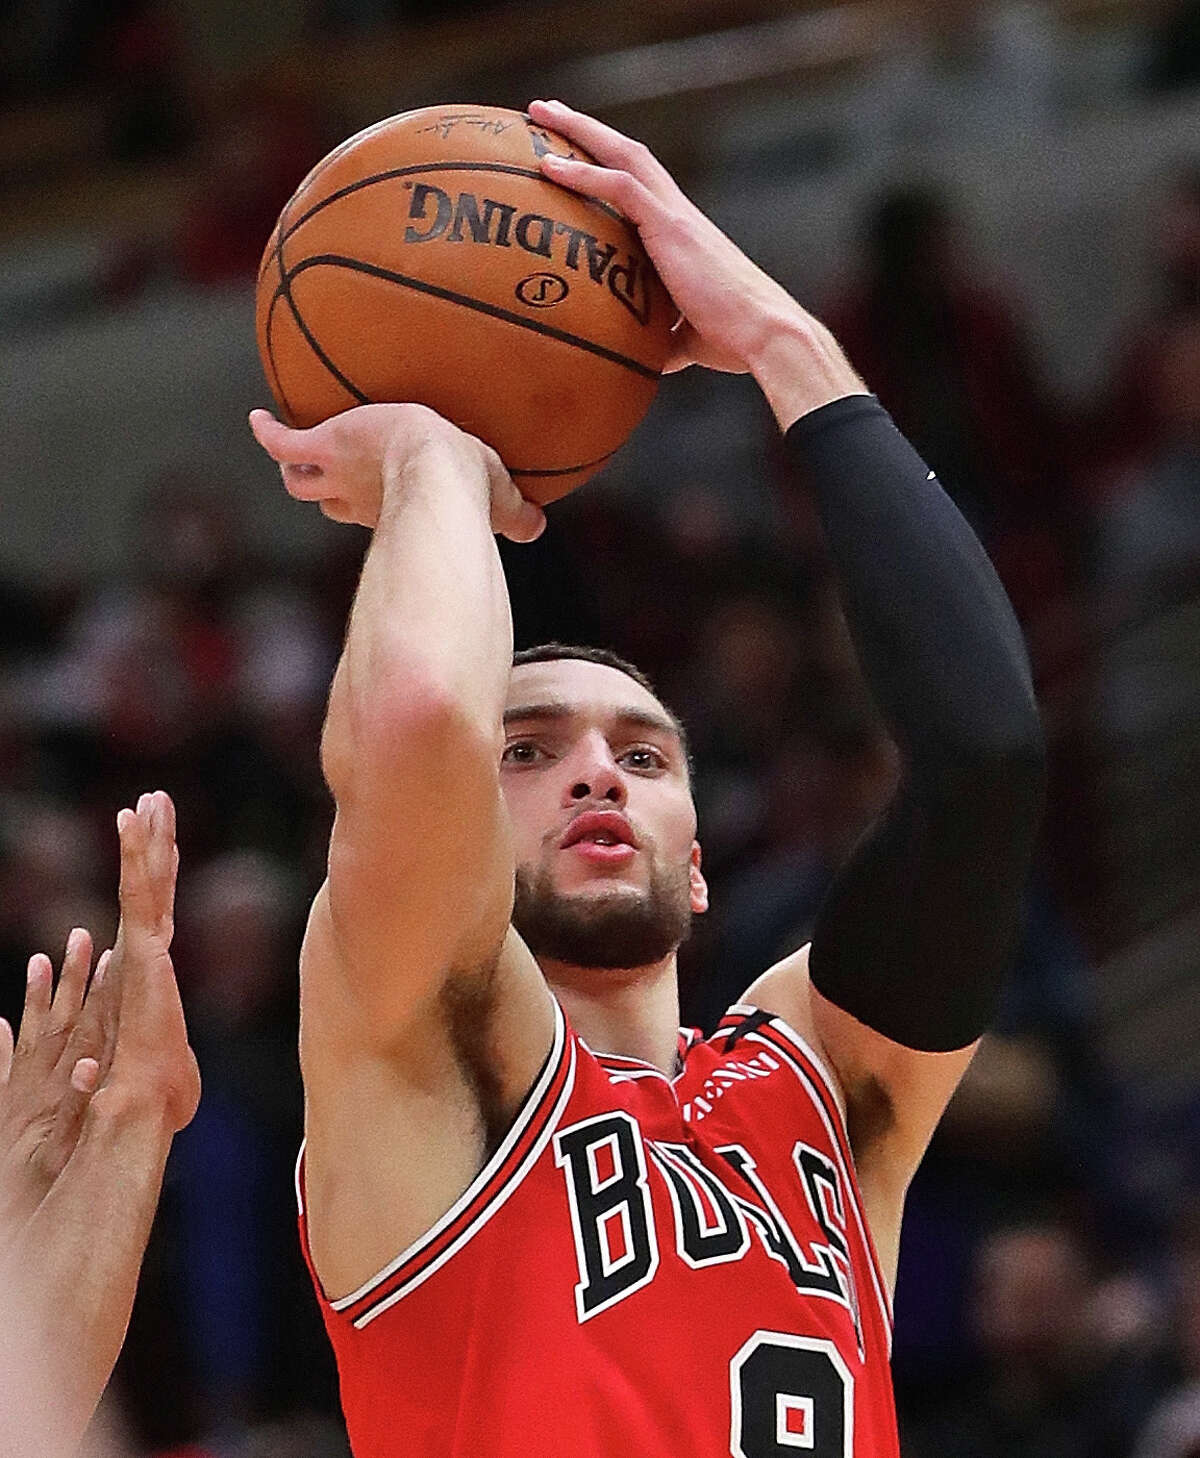 The Chicago Bulls are preparing to host the Spurs Wednesday night and after a 40-point game by Zach Lavine in a blowout against the Oklahoma City Thunder, Dejounte Murray is suggesting that the shooting guard skip the meeting and rest up.